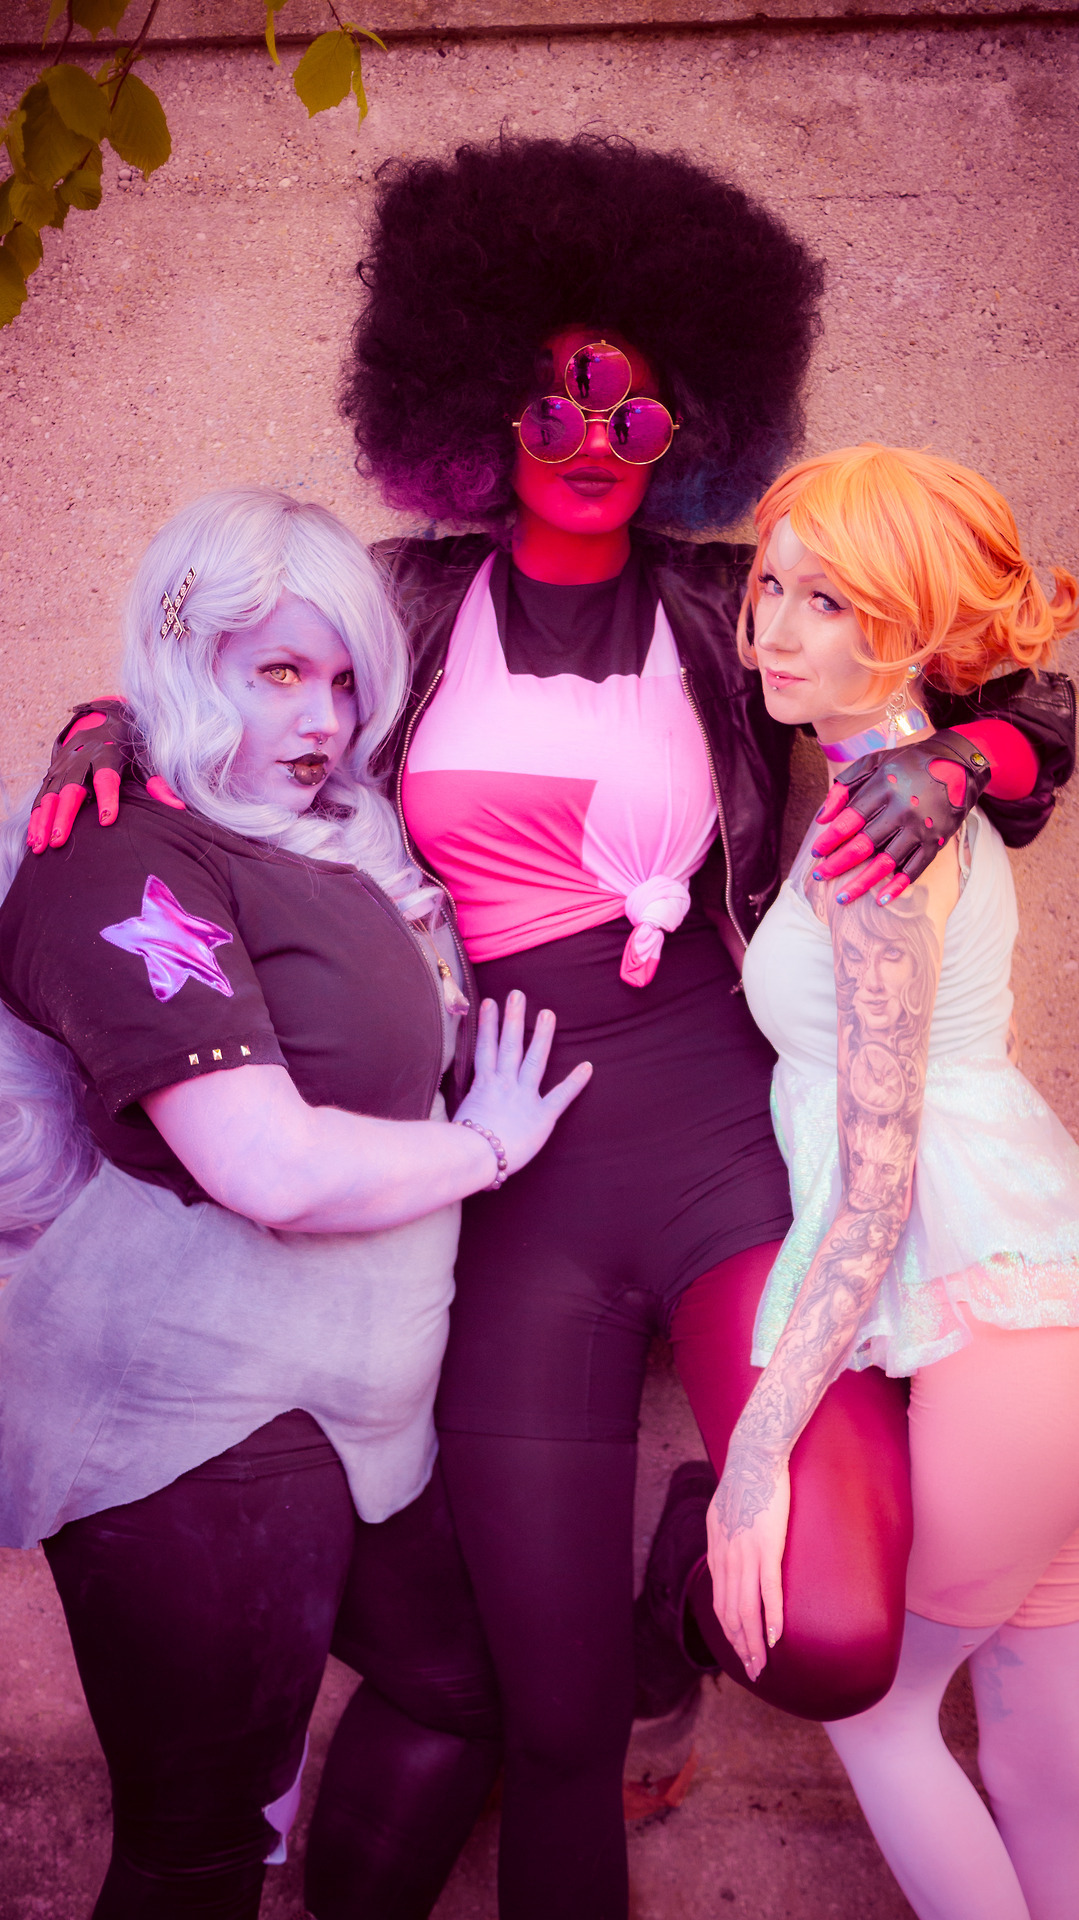 glasmond-photography:   Crystal Gems - Punky Versions: Part 3 (Find more pictures